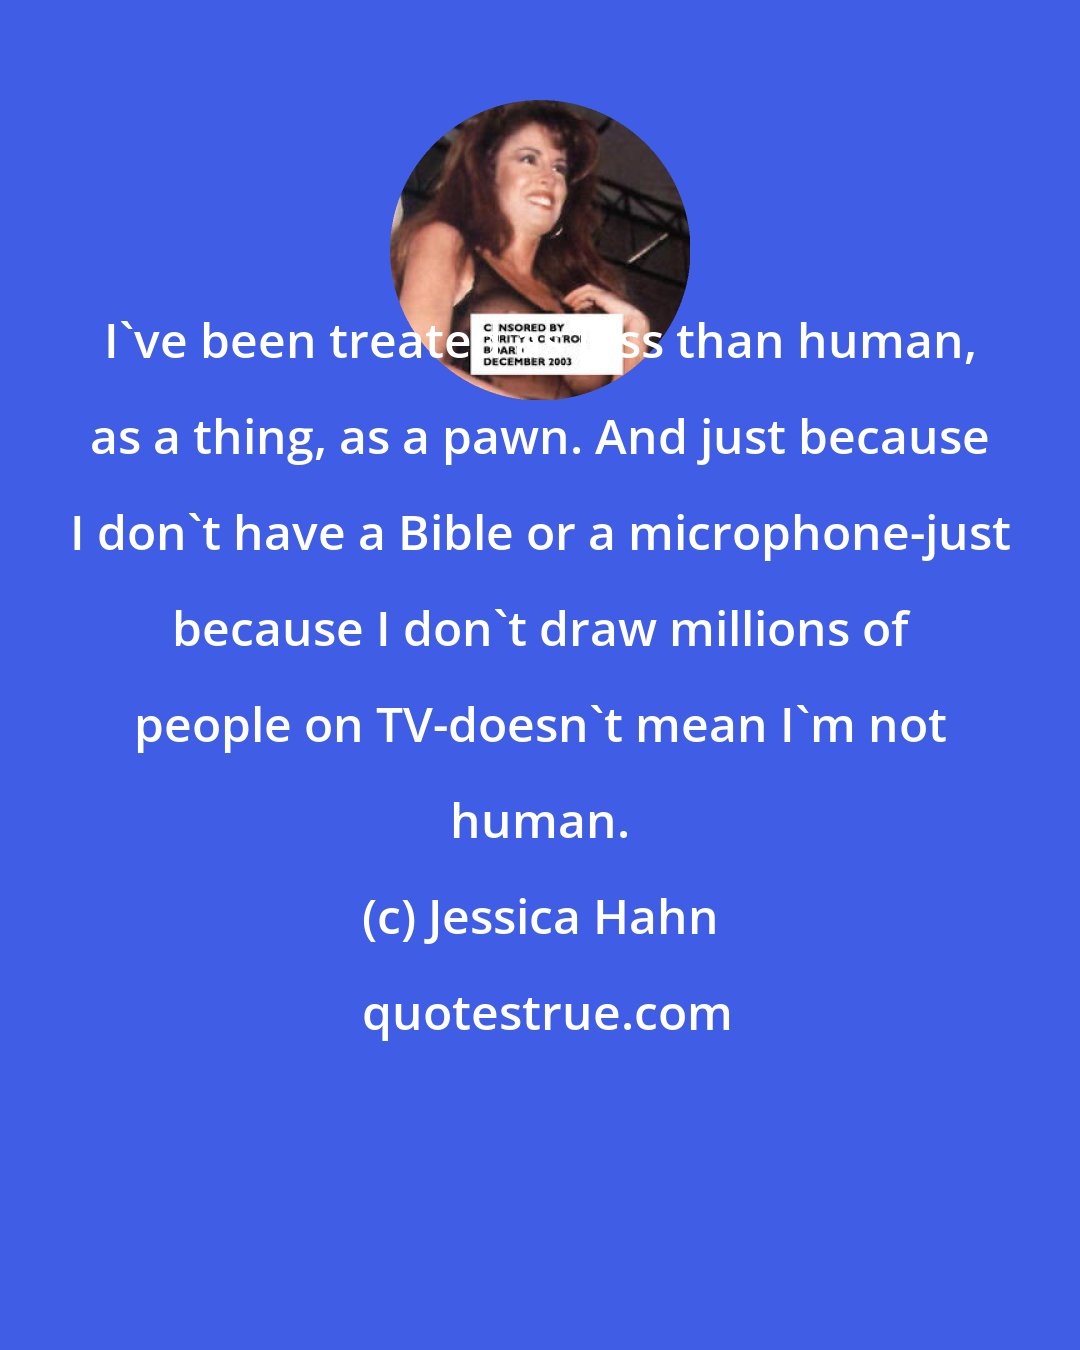 Jessica Hahn: I've been treated as less than human, as a thing, as a pawn. And just because I don't have a Bible or a microphone-just because I don't draw millions of people on TV-doesn't mean I'm not human.